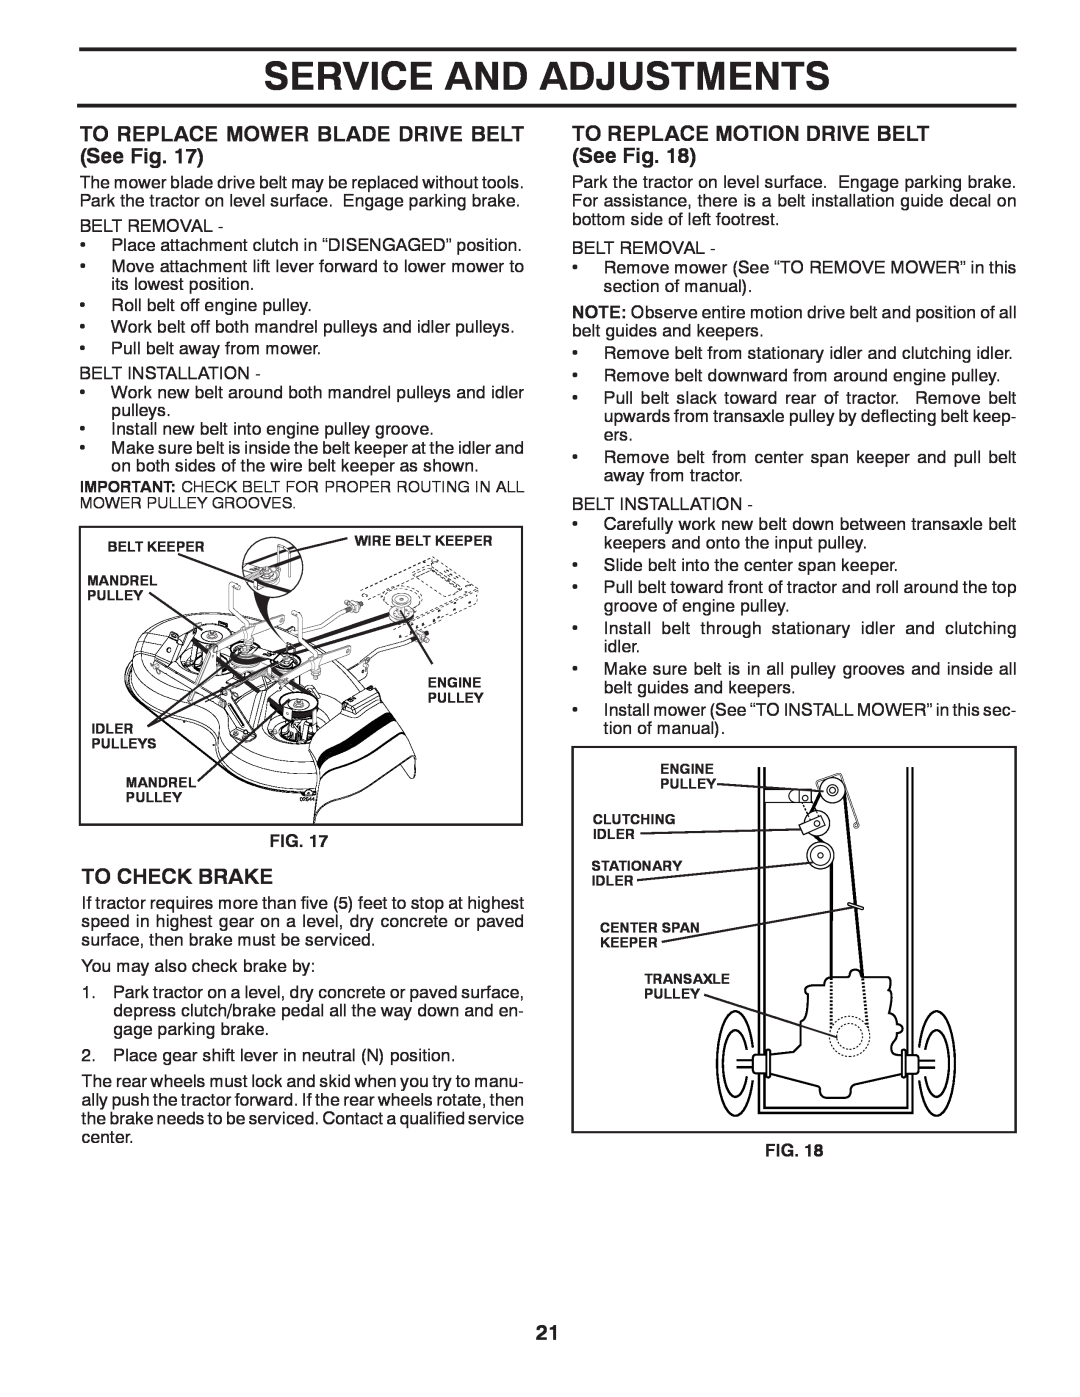 Poulan 425001 manual TO REPLACE MOWER BLADE DRIVE BELT See Fig, To Check Brake, TO REPLACE MOTION DRIVE BELT See Fig 